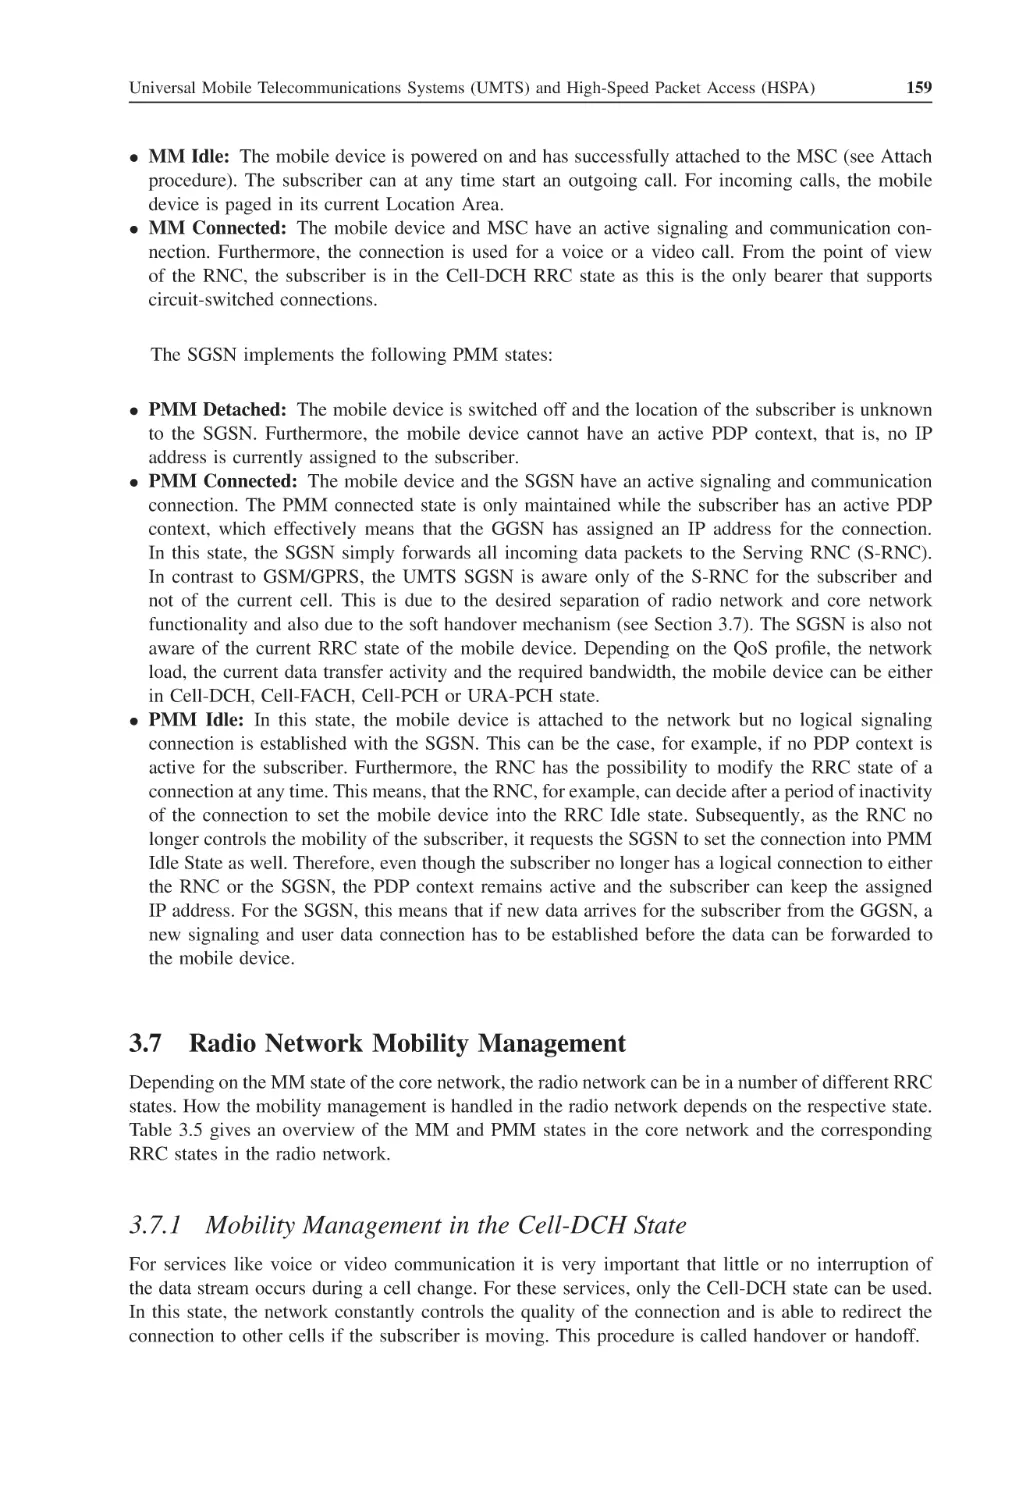 3.7 Radio Network Mobility Management
3.7.1 Mobility Management in the Cell-DCH State